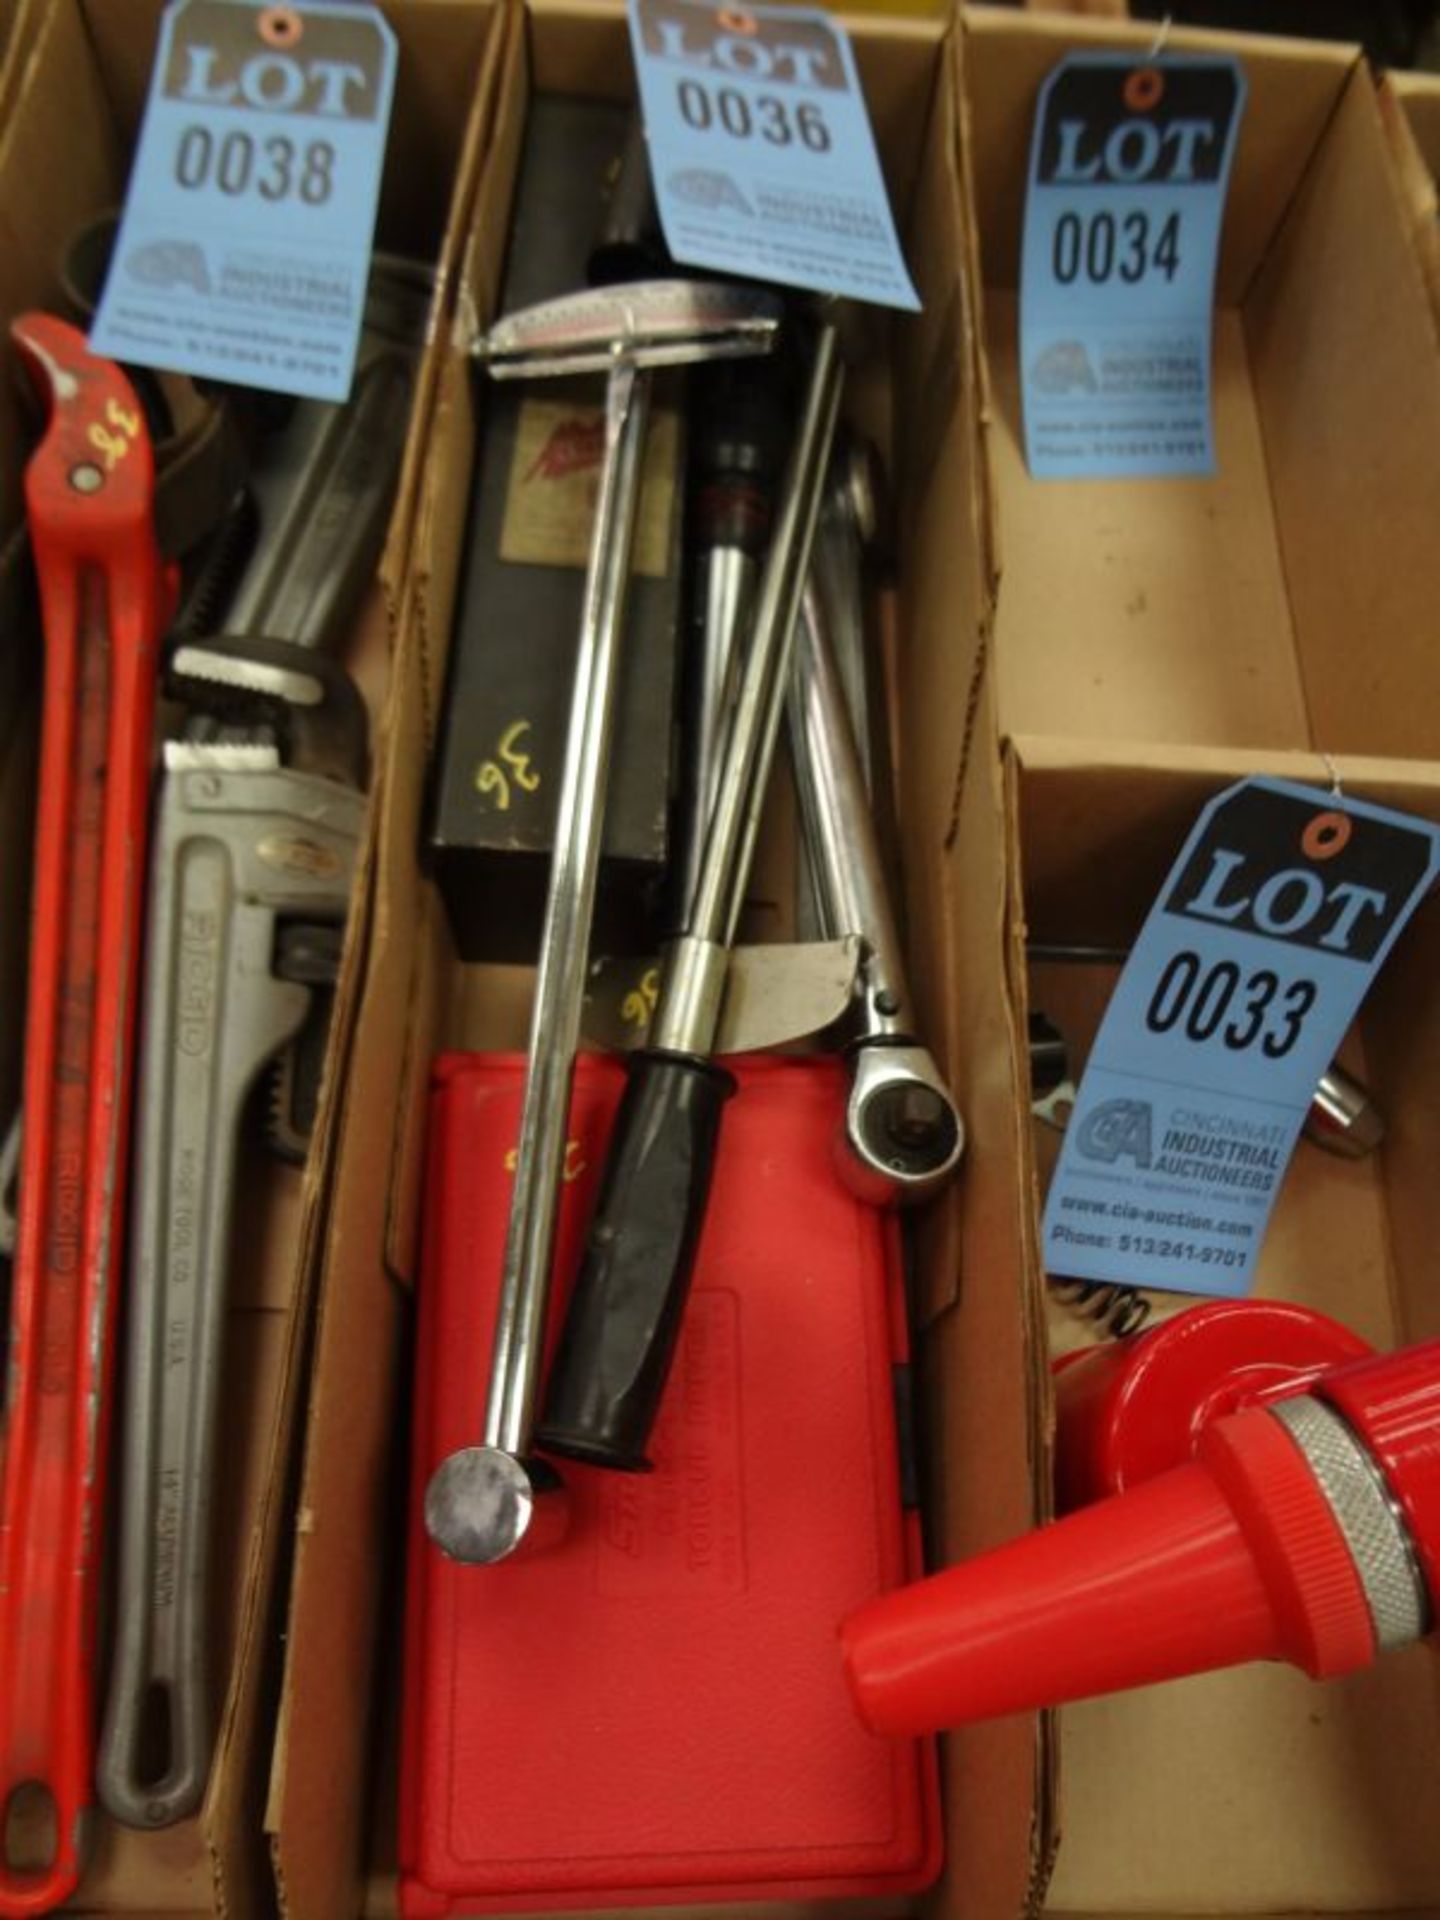 MISCELLANEOUS TORQUE WRENCHES